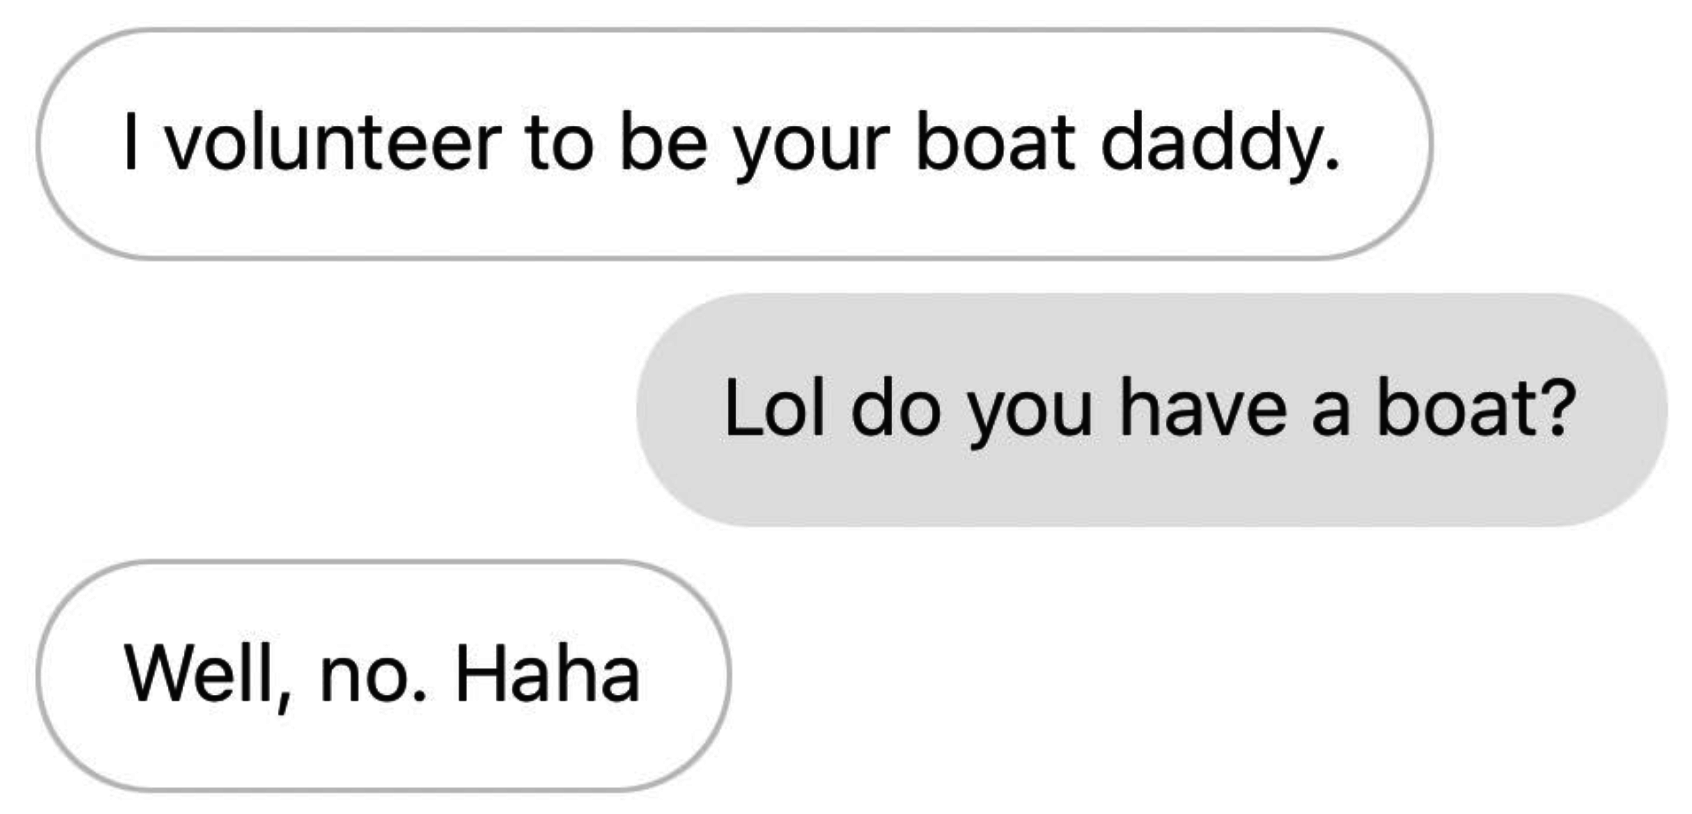 Someone volunteering to be a &quot;boat daddy,&quot; right before saying they don&#x27;t have a boat.